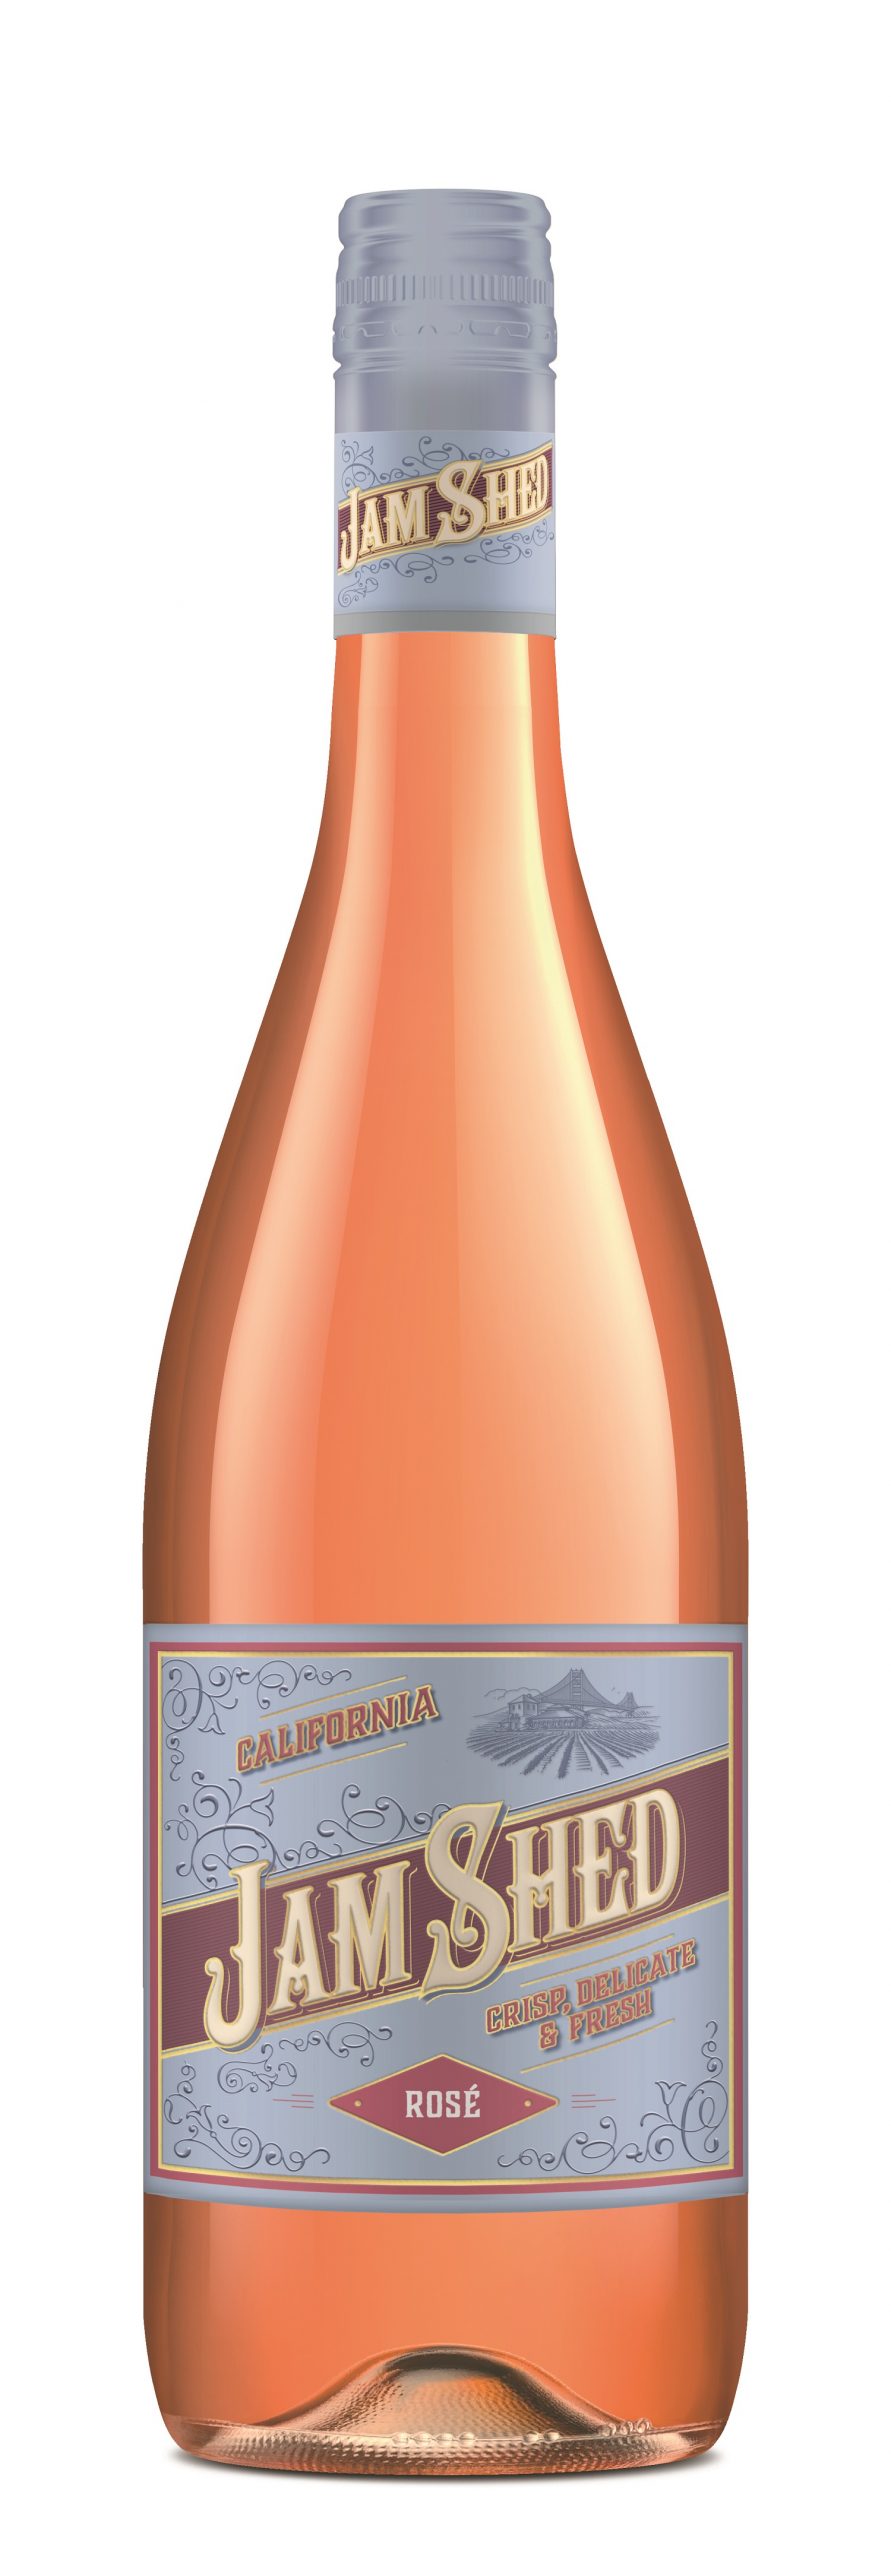 Accolade’s Jam Shed releases new Californian Rosé variety for summer